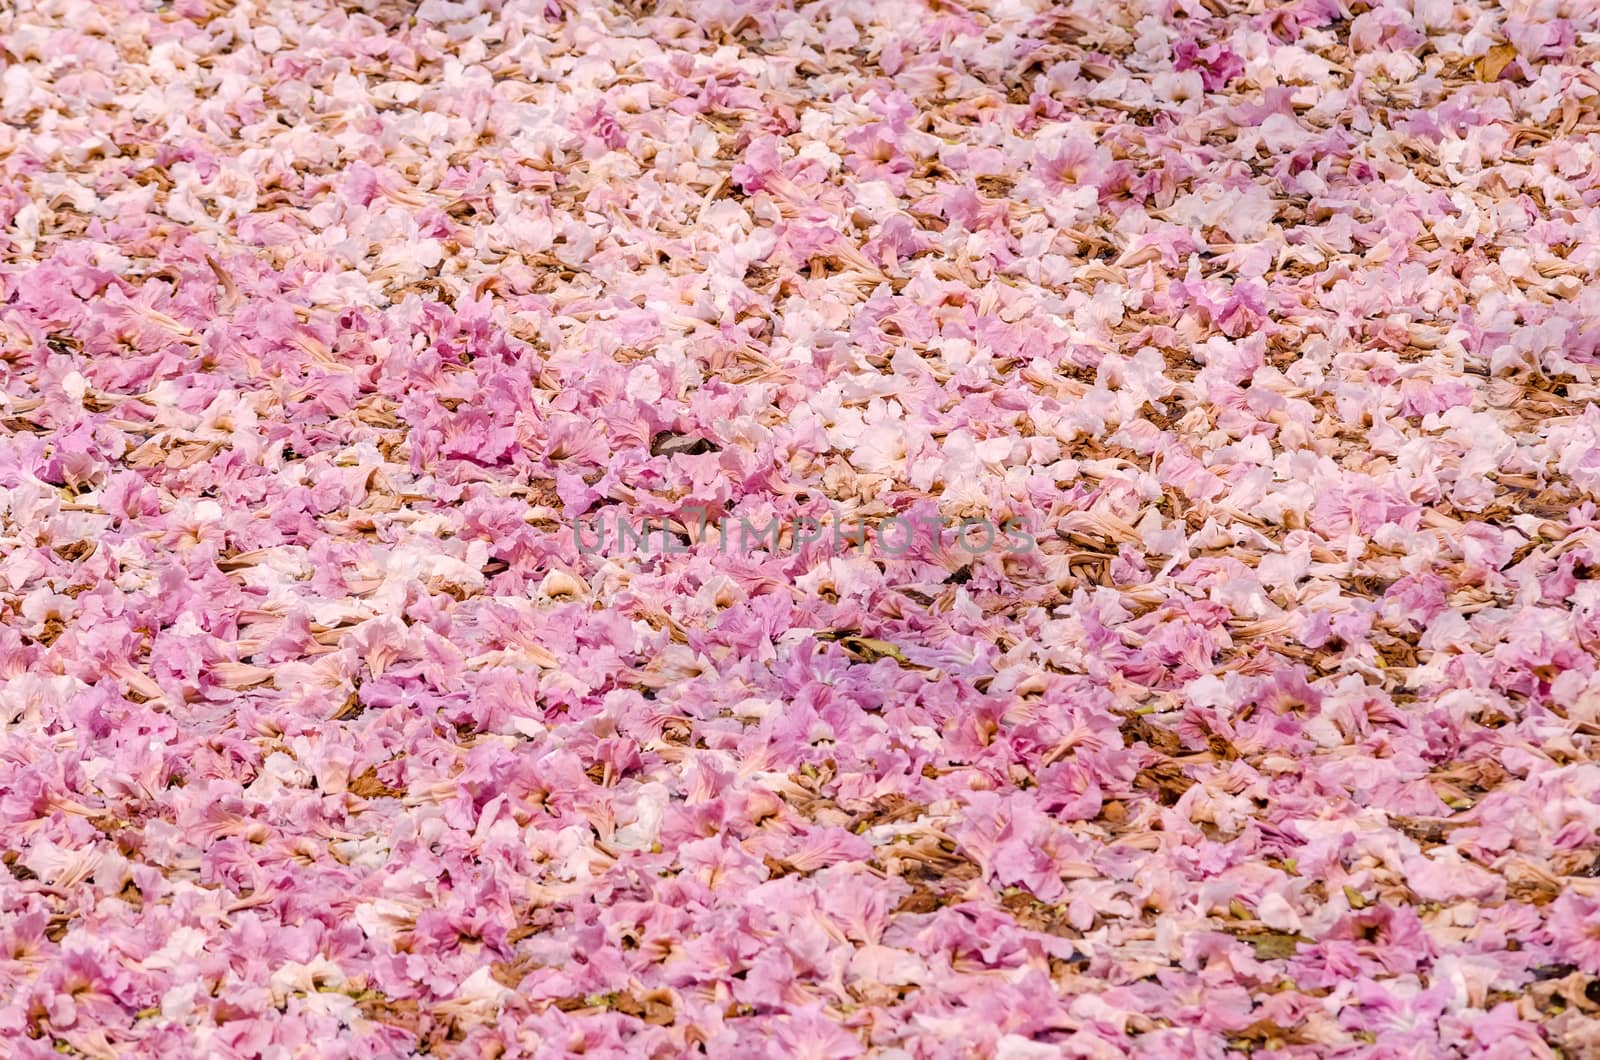 Texture of Tabebuia rosea on the ground, pink flower, fallen flower.